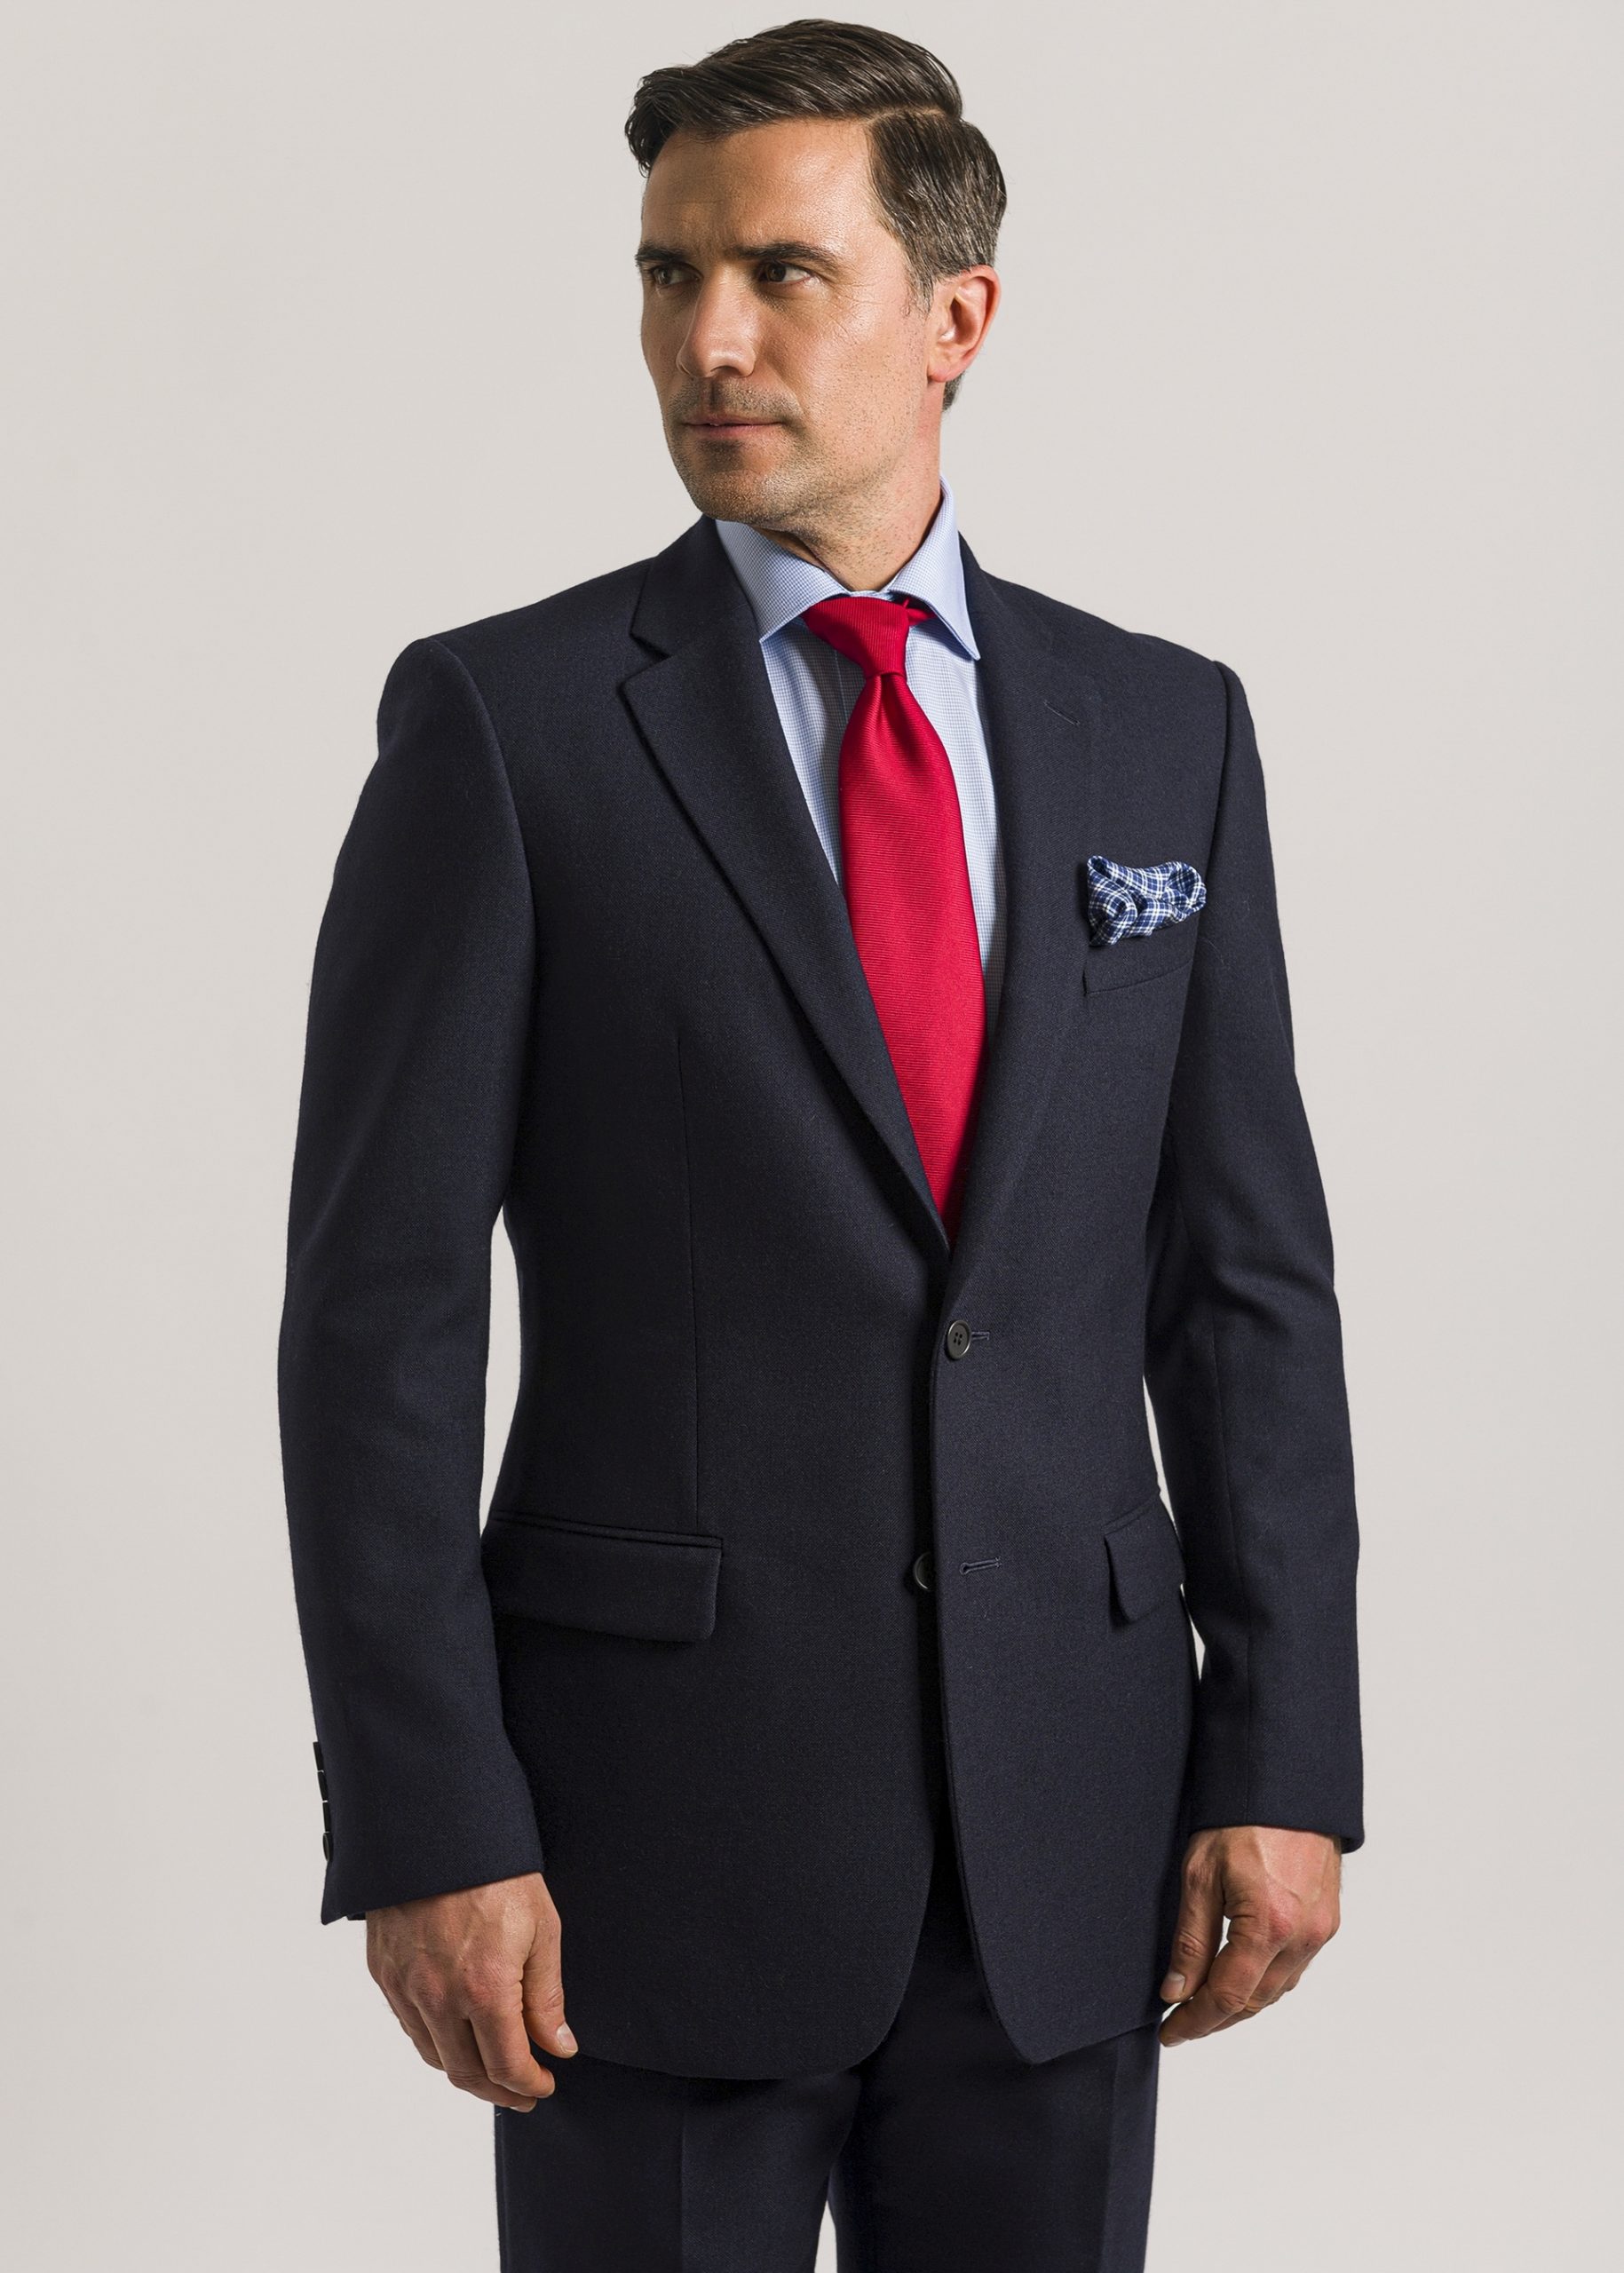 Men’s tailored fit navy suit styled with blue shirt